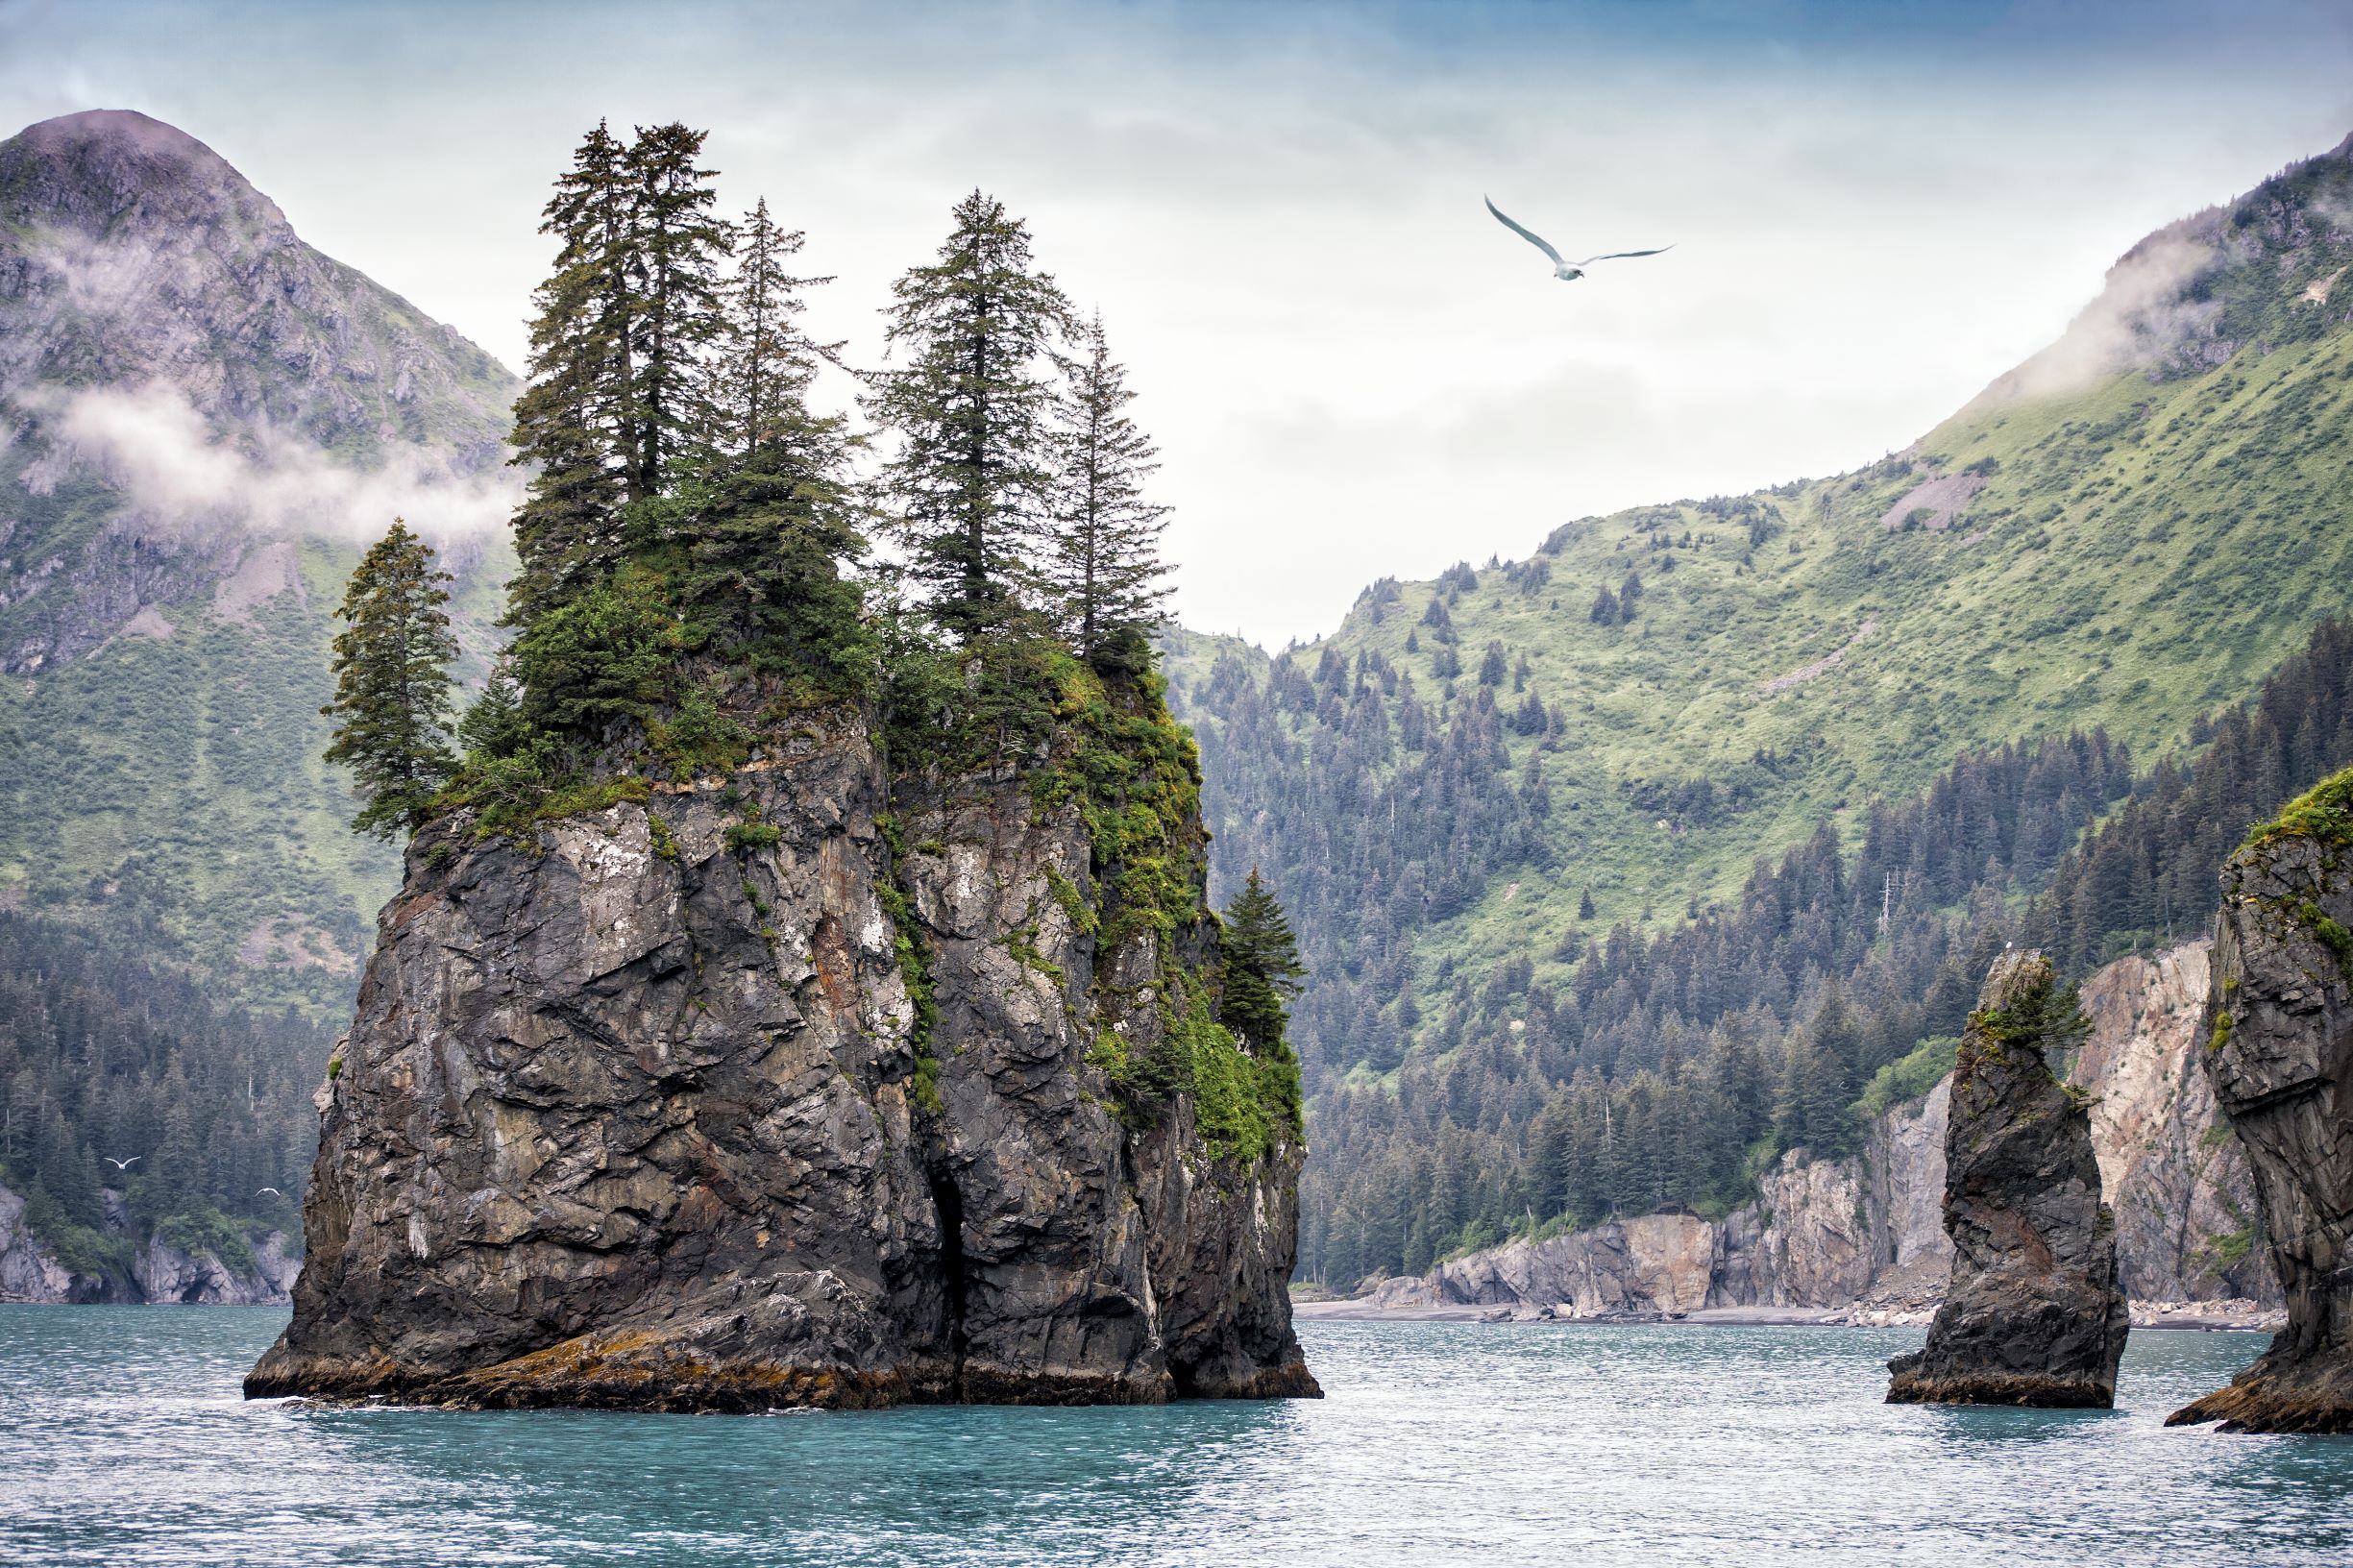 An up close view of the Resurrection Bay sea stacks.